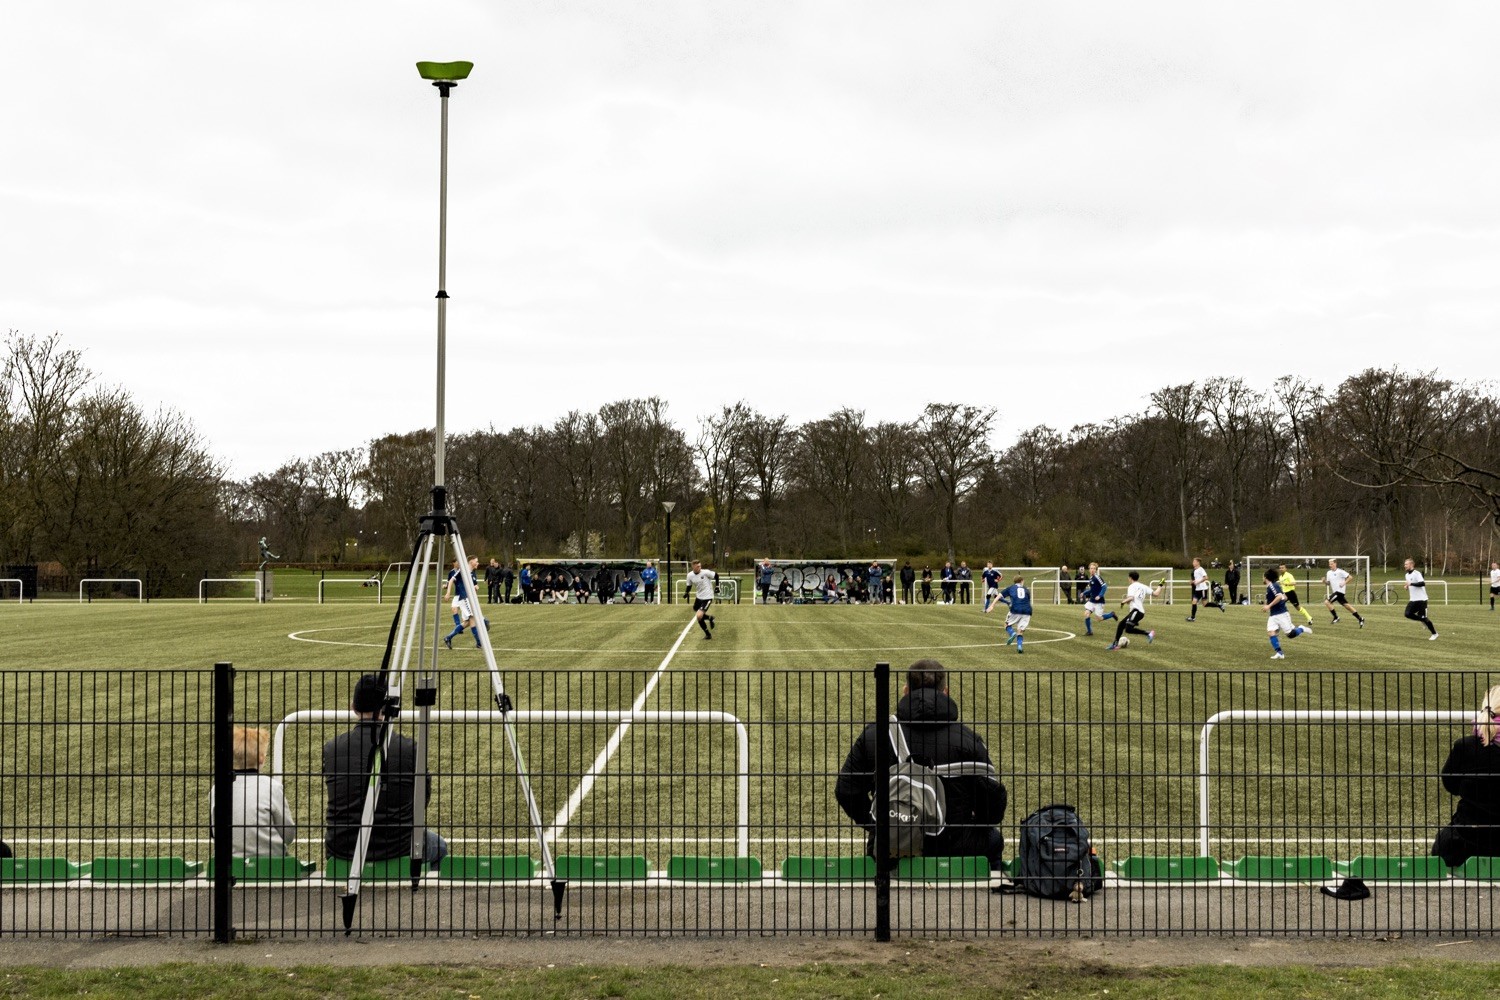 Deal agreed with Veo to secure video equipment for League